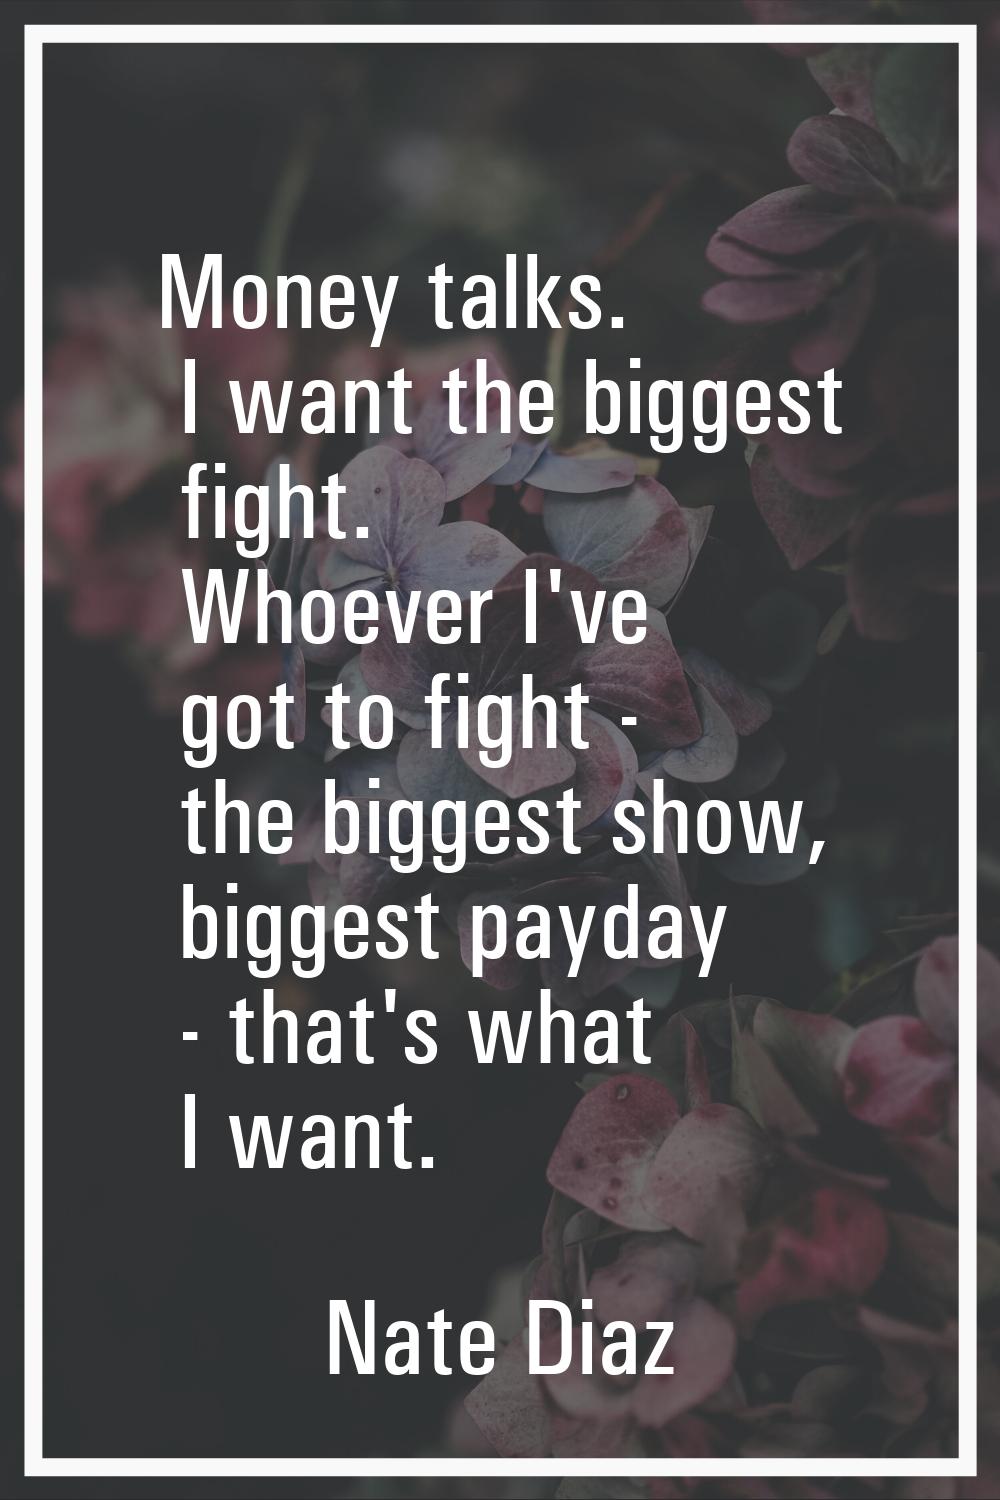 Money talks. I want the biggest fight. Whoever I've got to fight - the biggest show, biggest payday